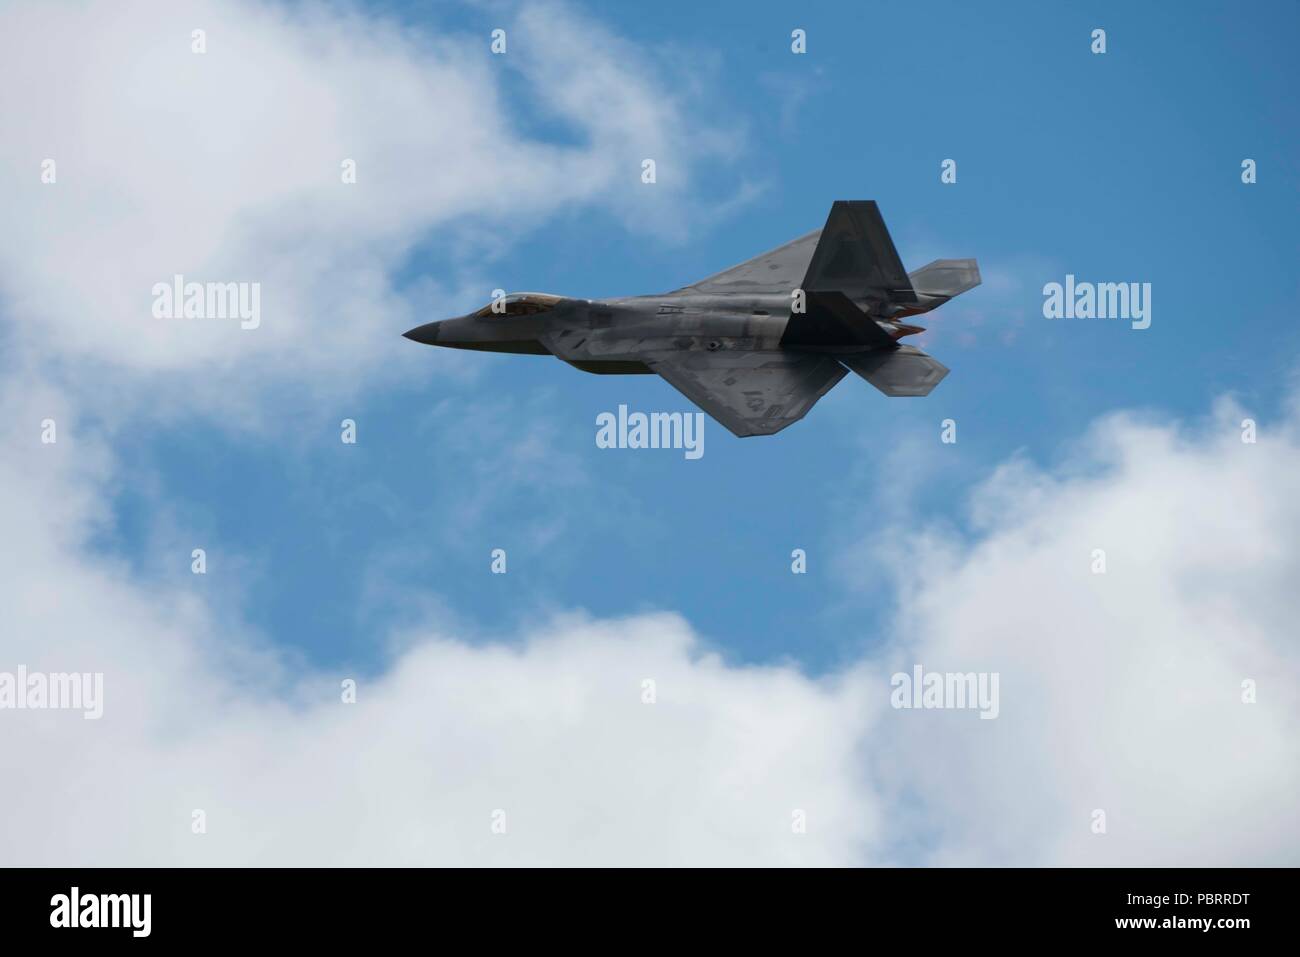 U.S. Air Force Maj. Paul 'Loco' Lopez, F-22 Raptor Demonstration Team commander/pilot, flies during a demonstration at Canadian Forces Base Cold Lake, Canada, July 22, 2018. The Cold Lake Air Show is the only visit in Canada for the Raptor this year. Stock Photo